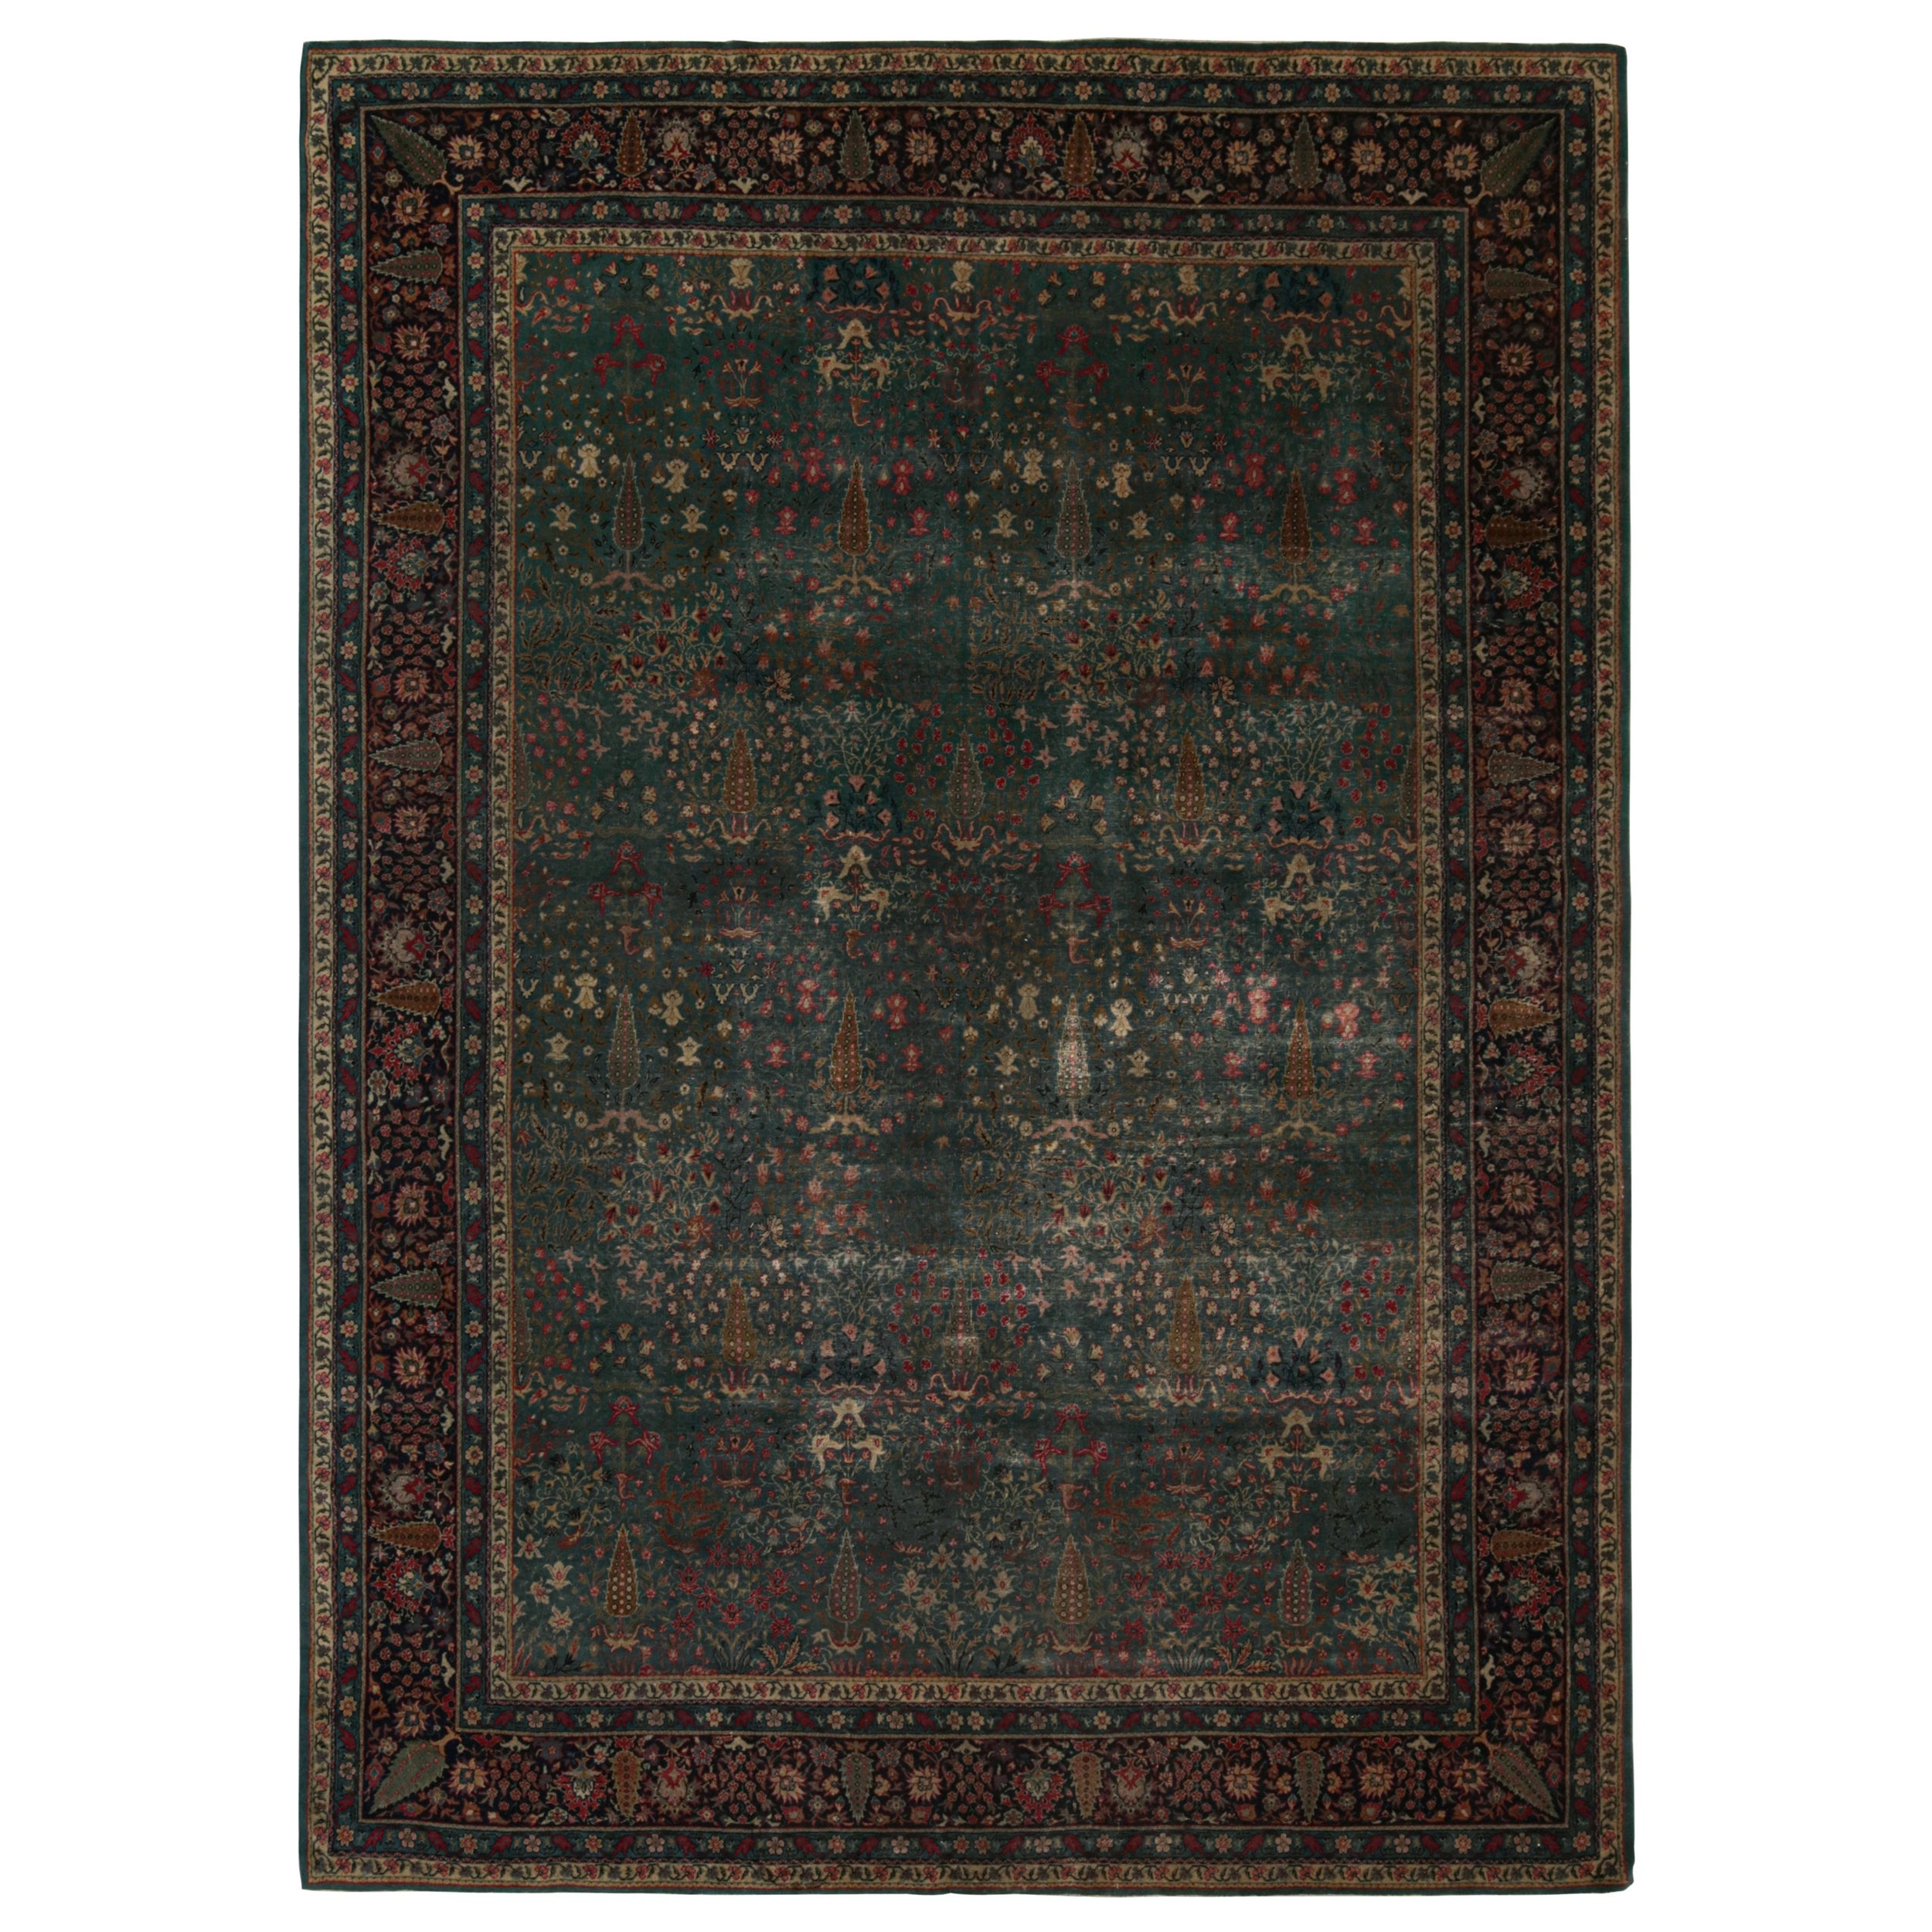 Antique Sivas Rug in Teal, with Floral Patterns, from Rug & Kilim For Sale